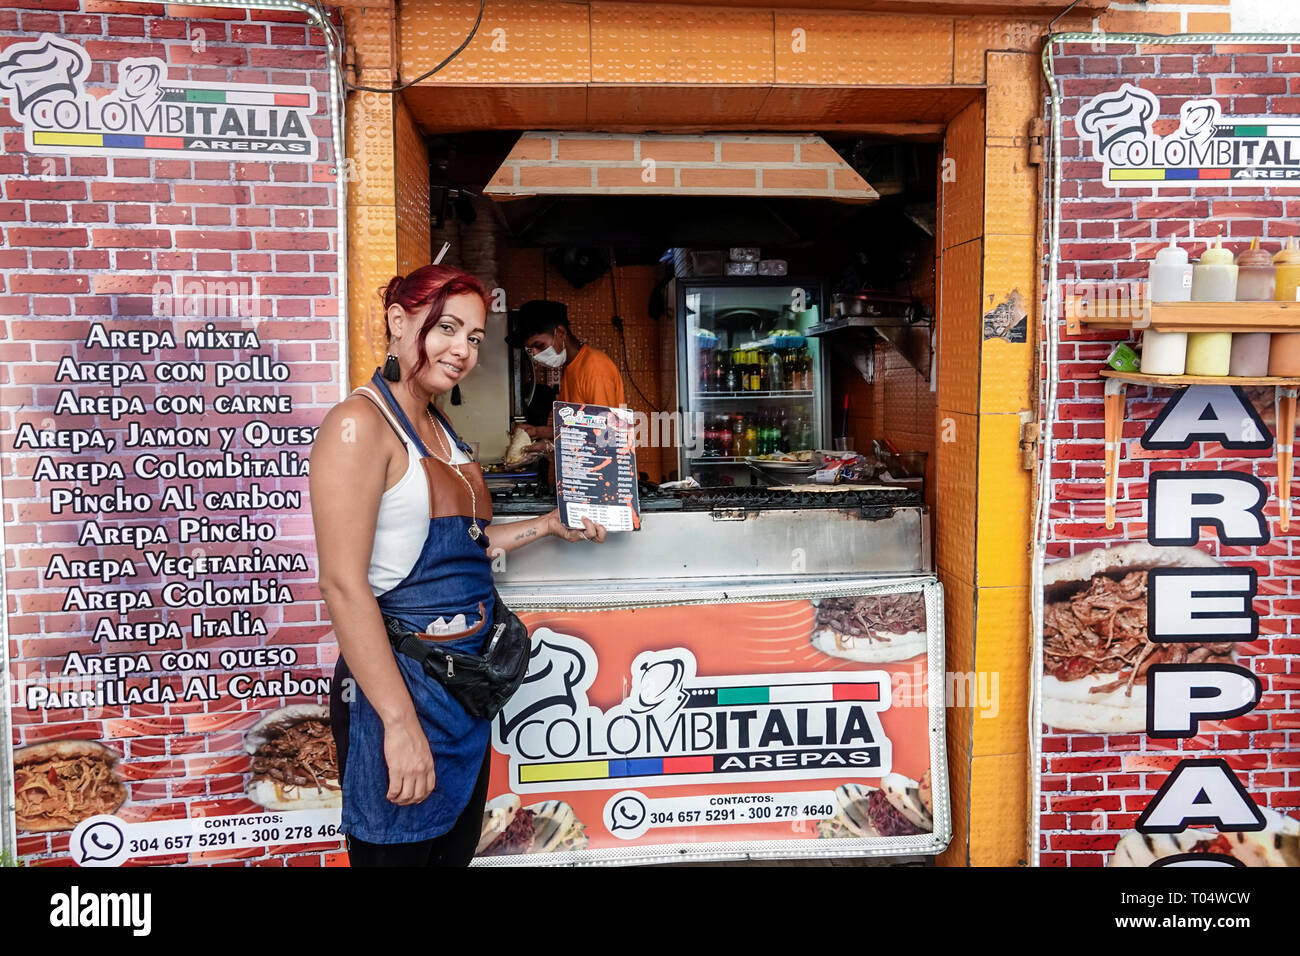 Cartagena Colombia,Center,centre,Getsemani,Hispanic resident residents,woman female women,offering menu,arepas stand stall vendor,menu,manager,COL1901 Stock Photo